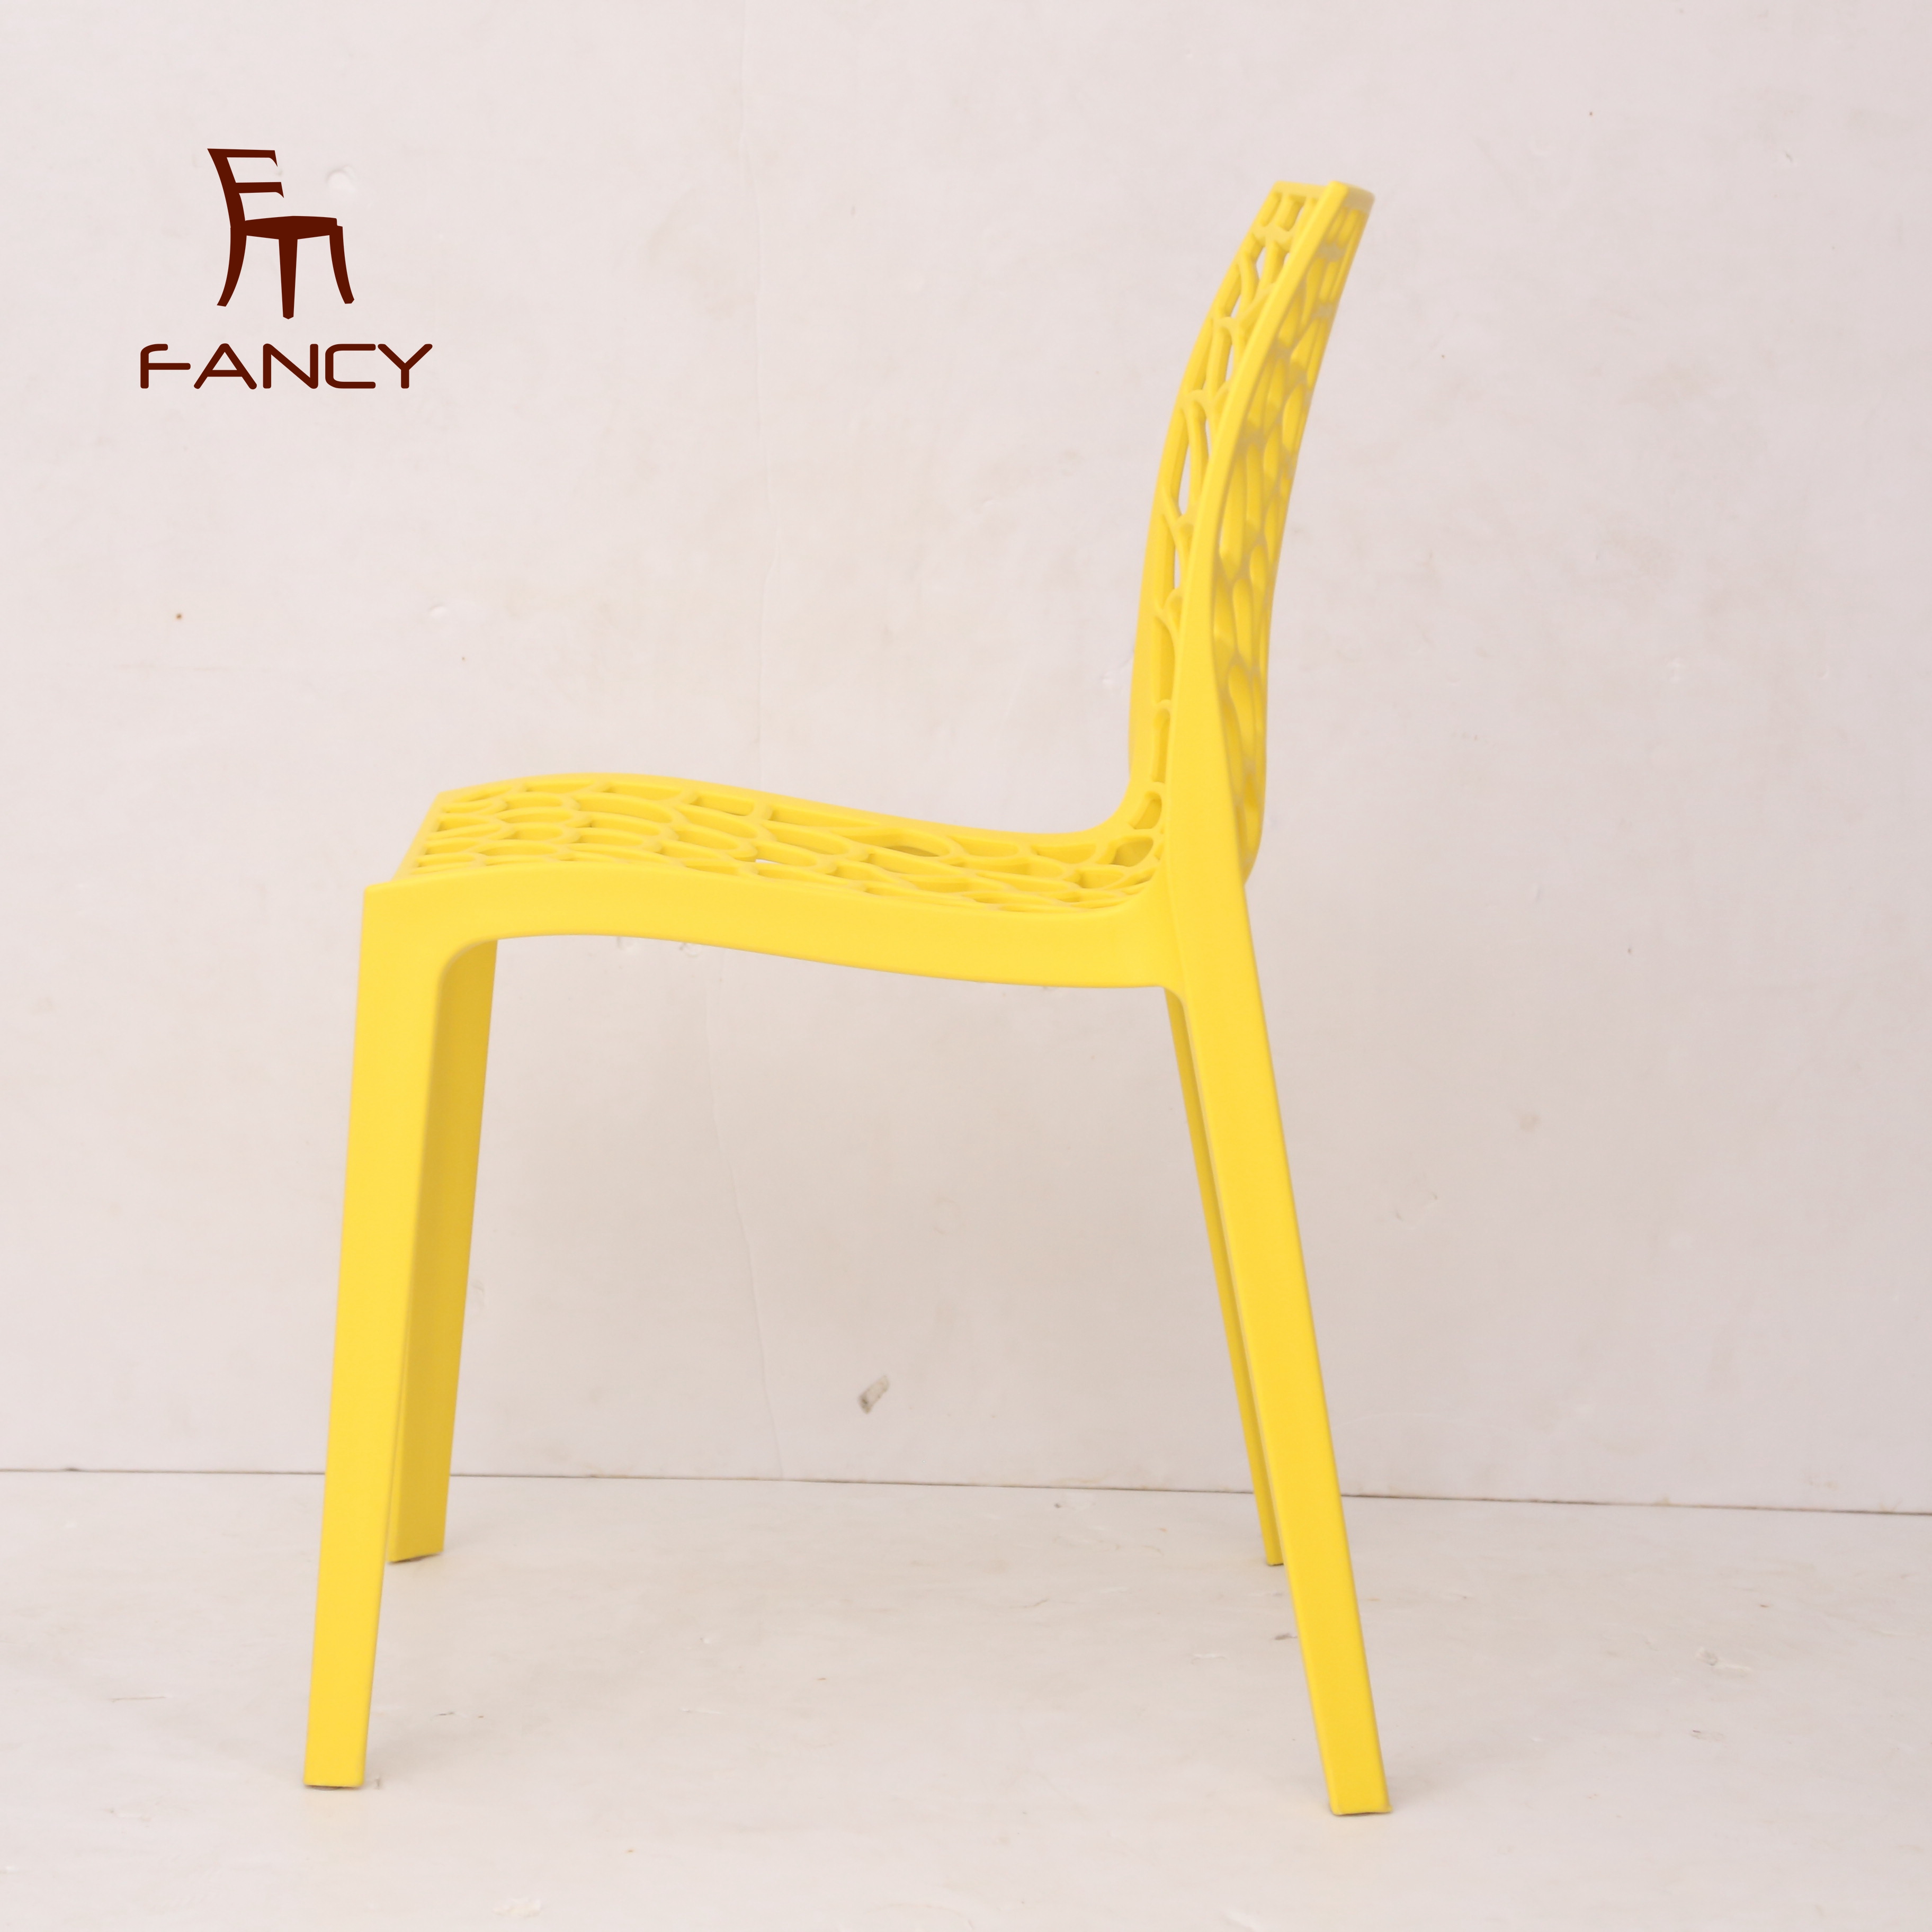 Dining Room Furniture Sillas Plasticas Chaise Cheap Price Modern Leisure Cafe Dining Chair Stackable Plastic Chair 